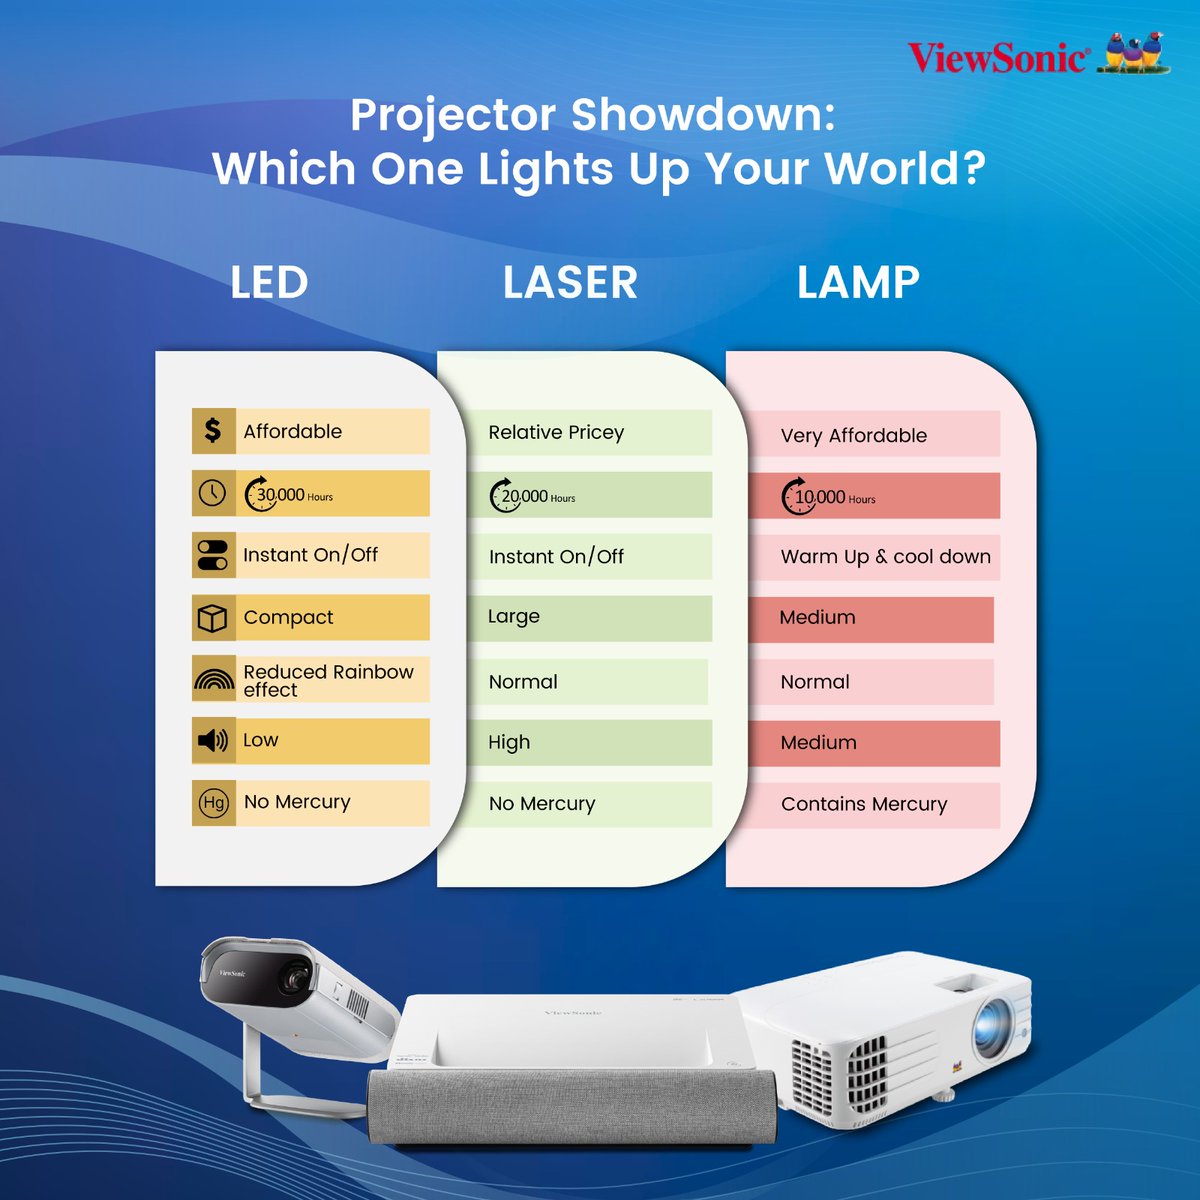 Curious about the projector options? LED, laser, or lamp, the projector showdown begins! 🎥✨ Dive into this comparison and discover the brightest option as per your requirements.

#viewsonic #viewsonicindia #Projector #Projection #HomeEntertainment #avtechlife #projectone